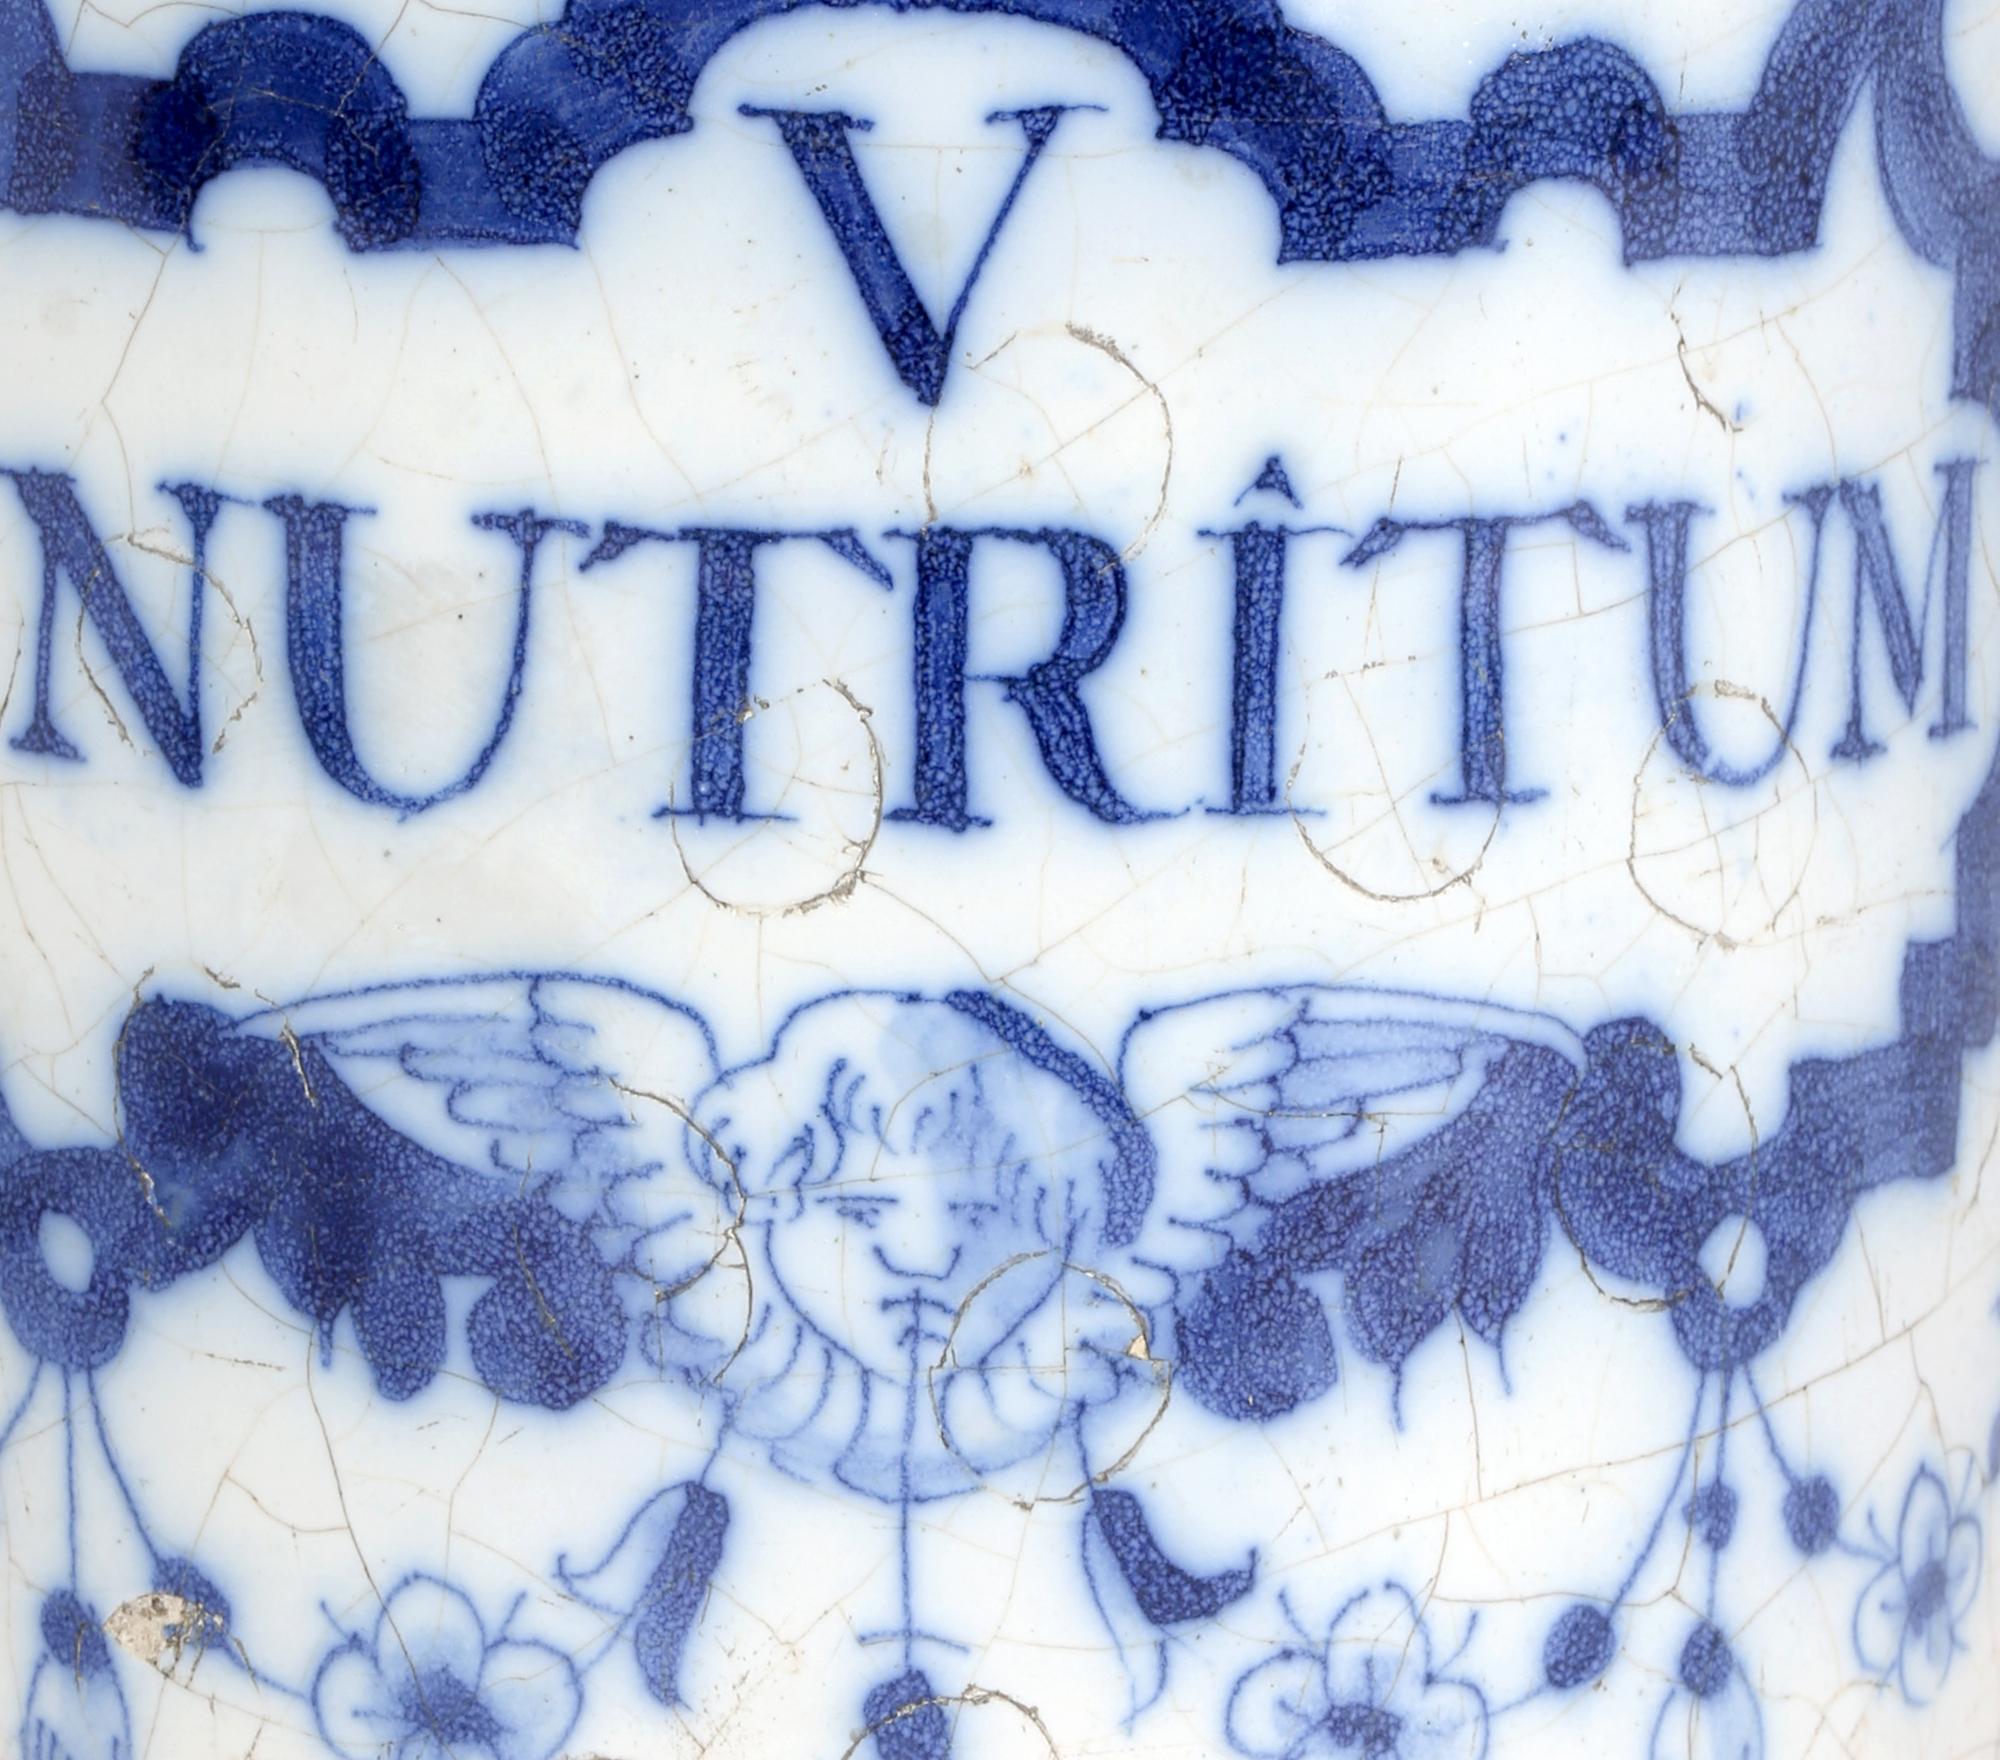 Delft Pottery Early 18th Century Apothecary Jar Marked Nutritum 4